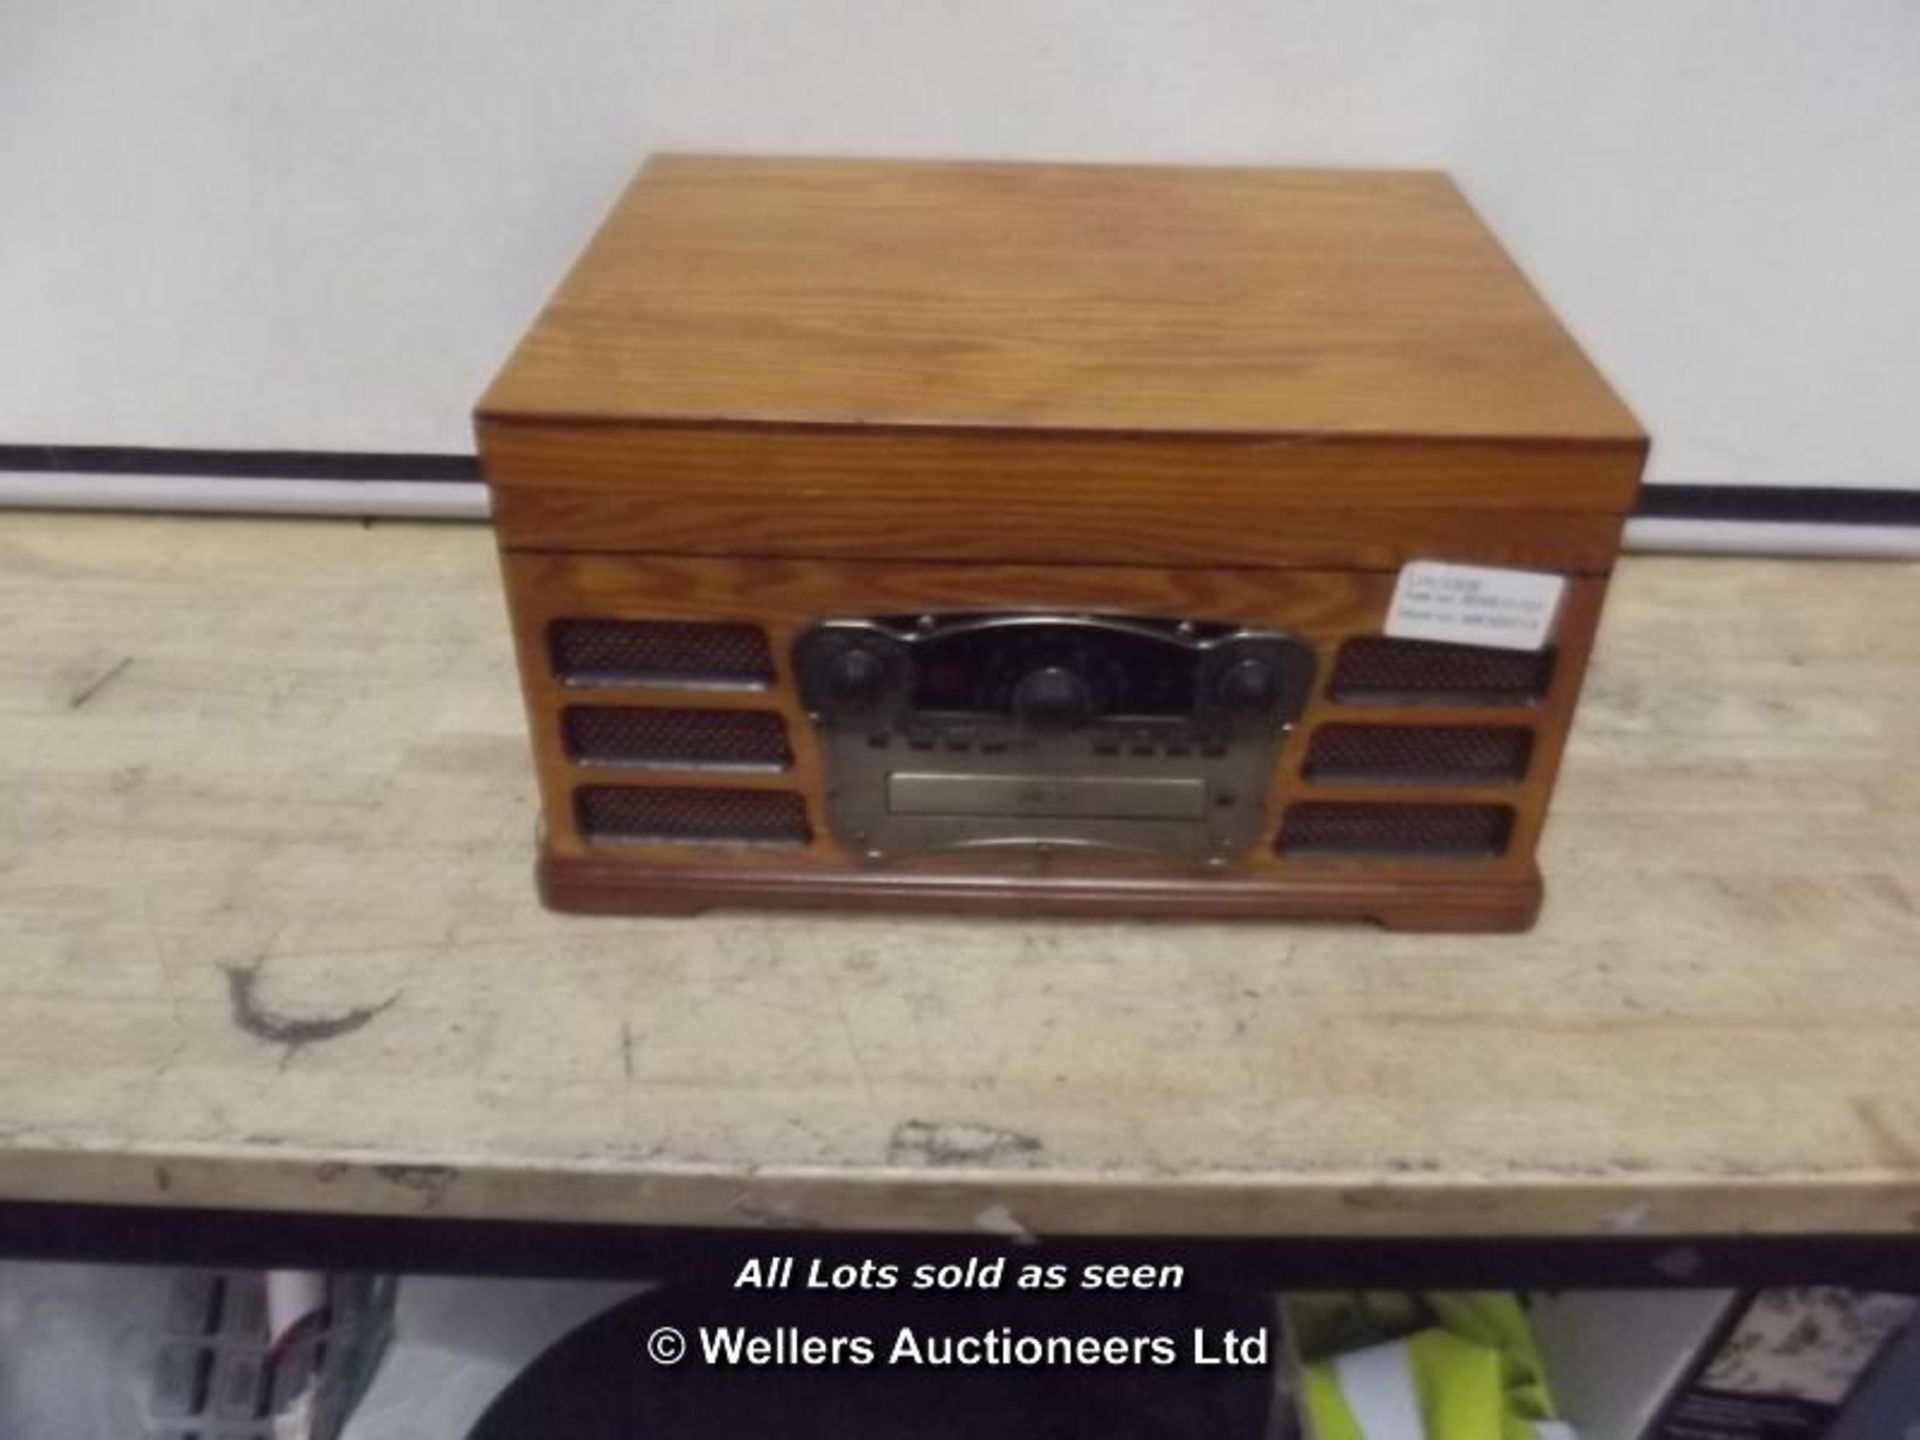 WOODEN RETRO TURNTABLE 3 SPEED AM/FM CD AND TAPE PLAYER 2450-M04-UK / GRADE: RETURNS / BOXED (